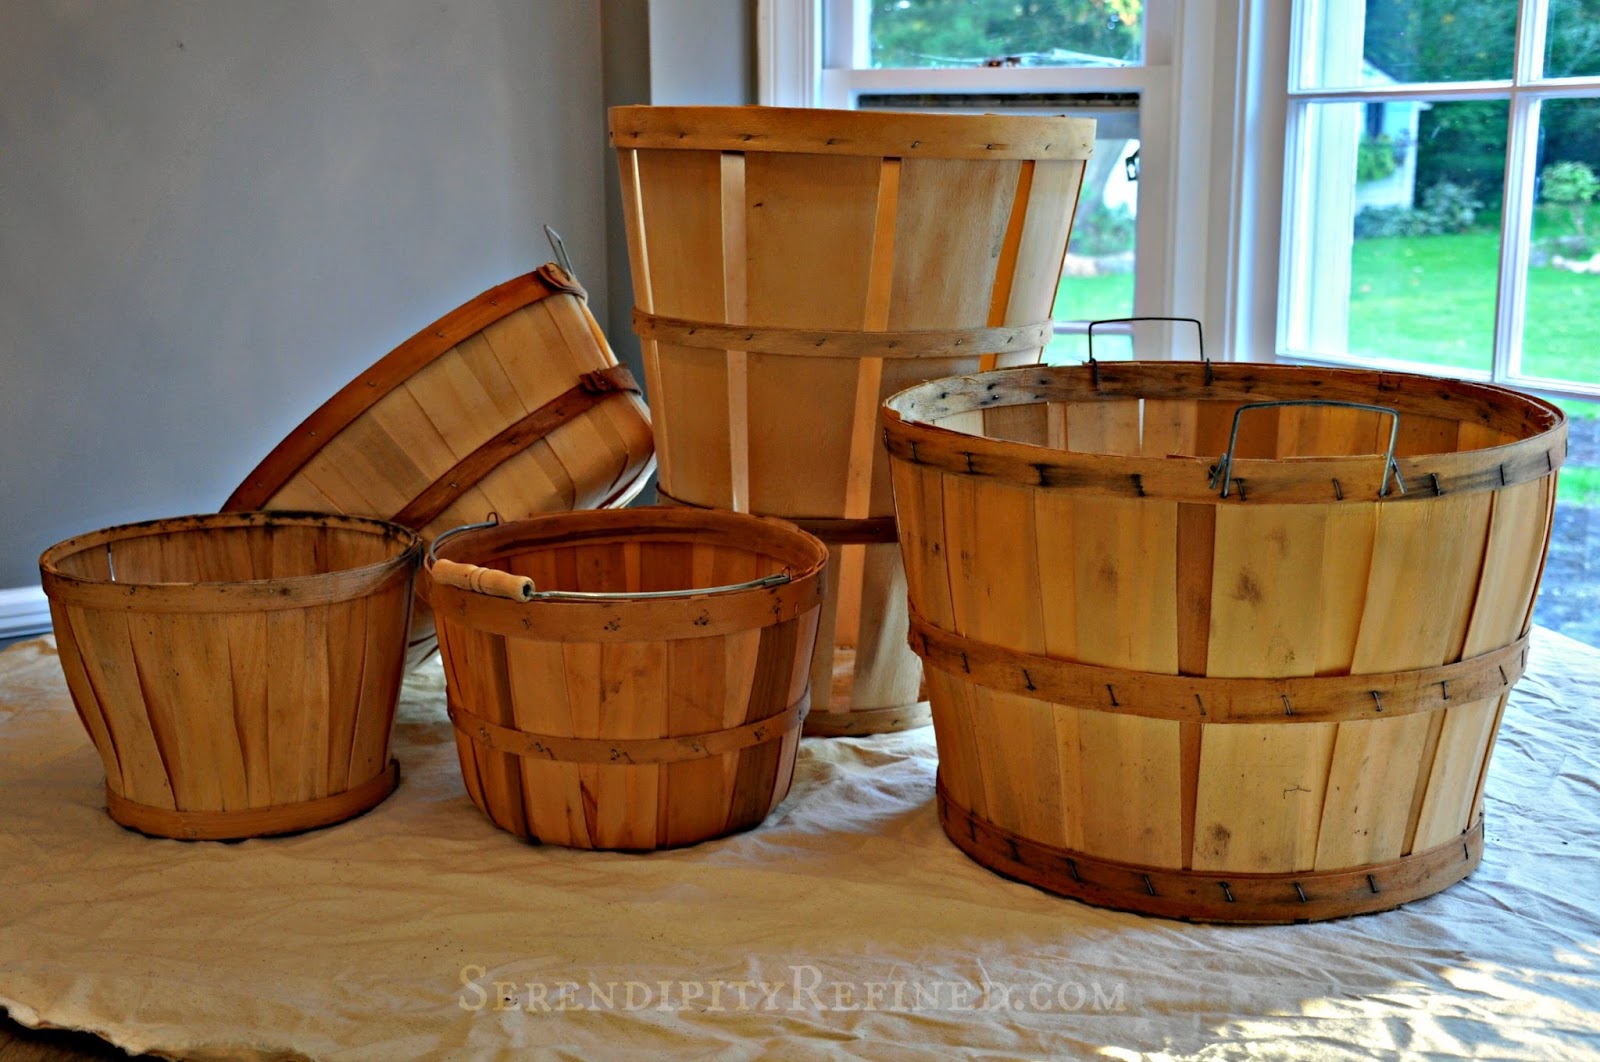 Serendipity Refined Blog: How To Make New Bushel Baskets Look Old